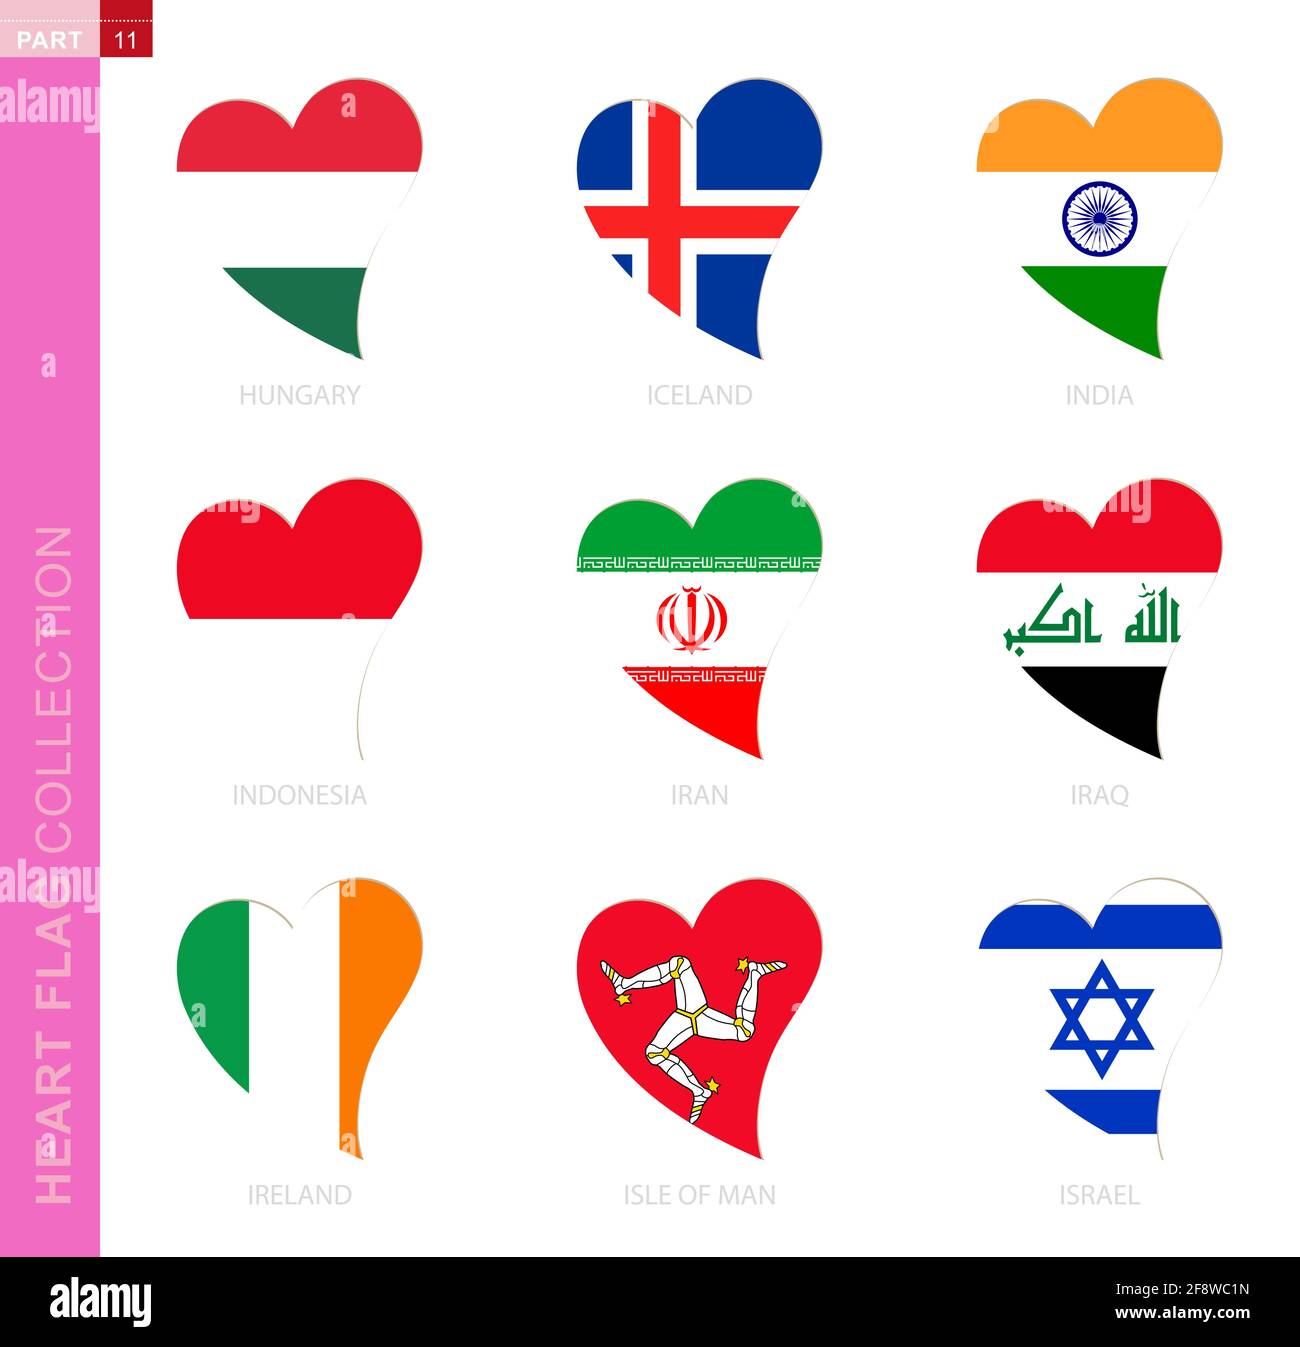 Сollection of flags in the shape of a heart. 9 heart icon with flag of country Hungary, Iceland, India, Indonesia, Iran, Iraq, Ireland, Isle of Man, I Stock Vector